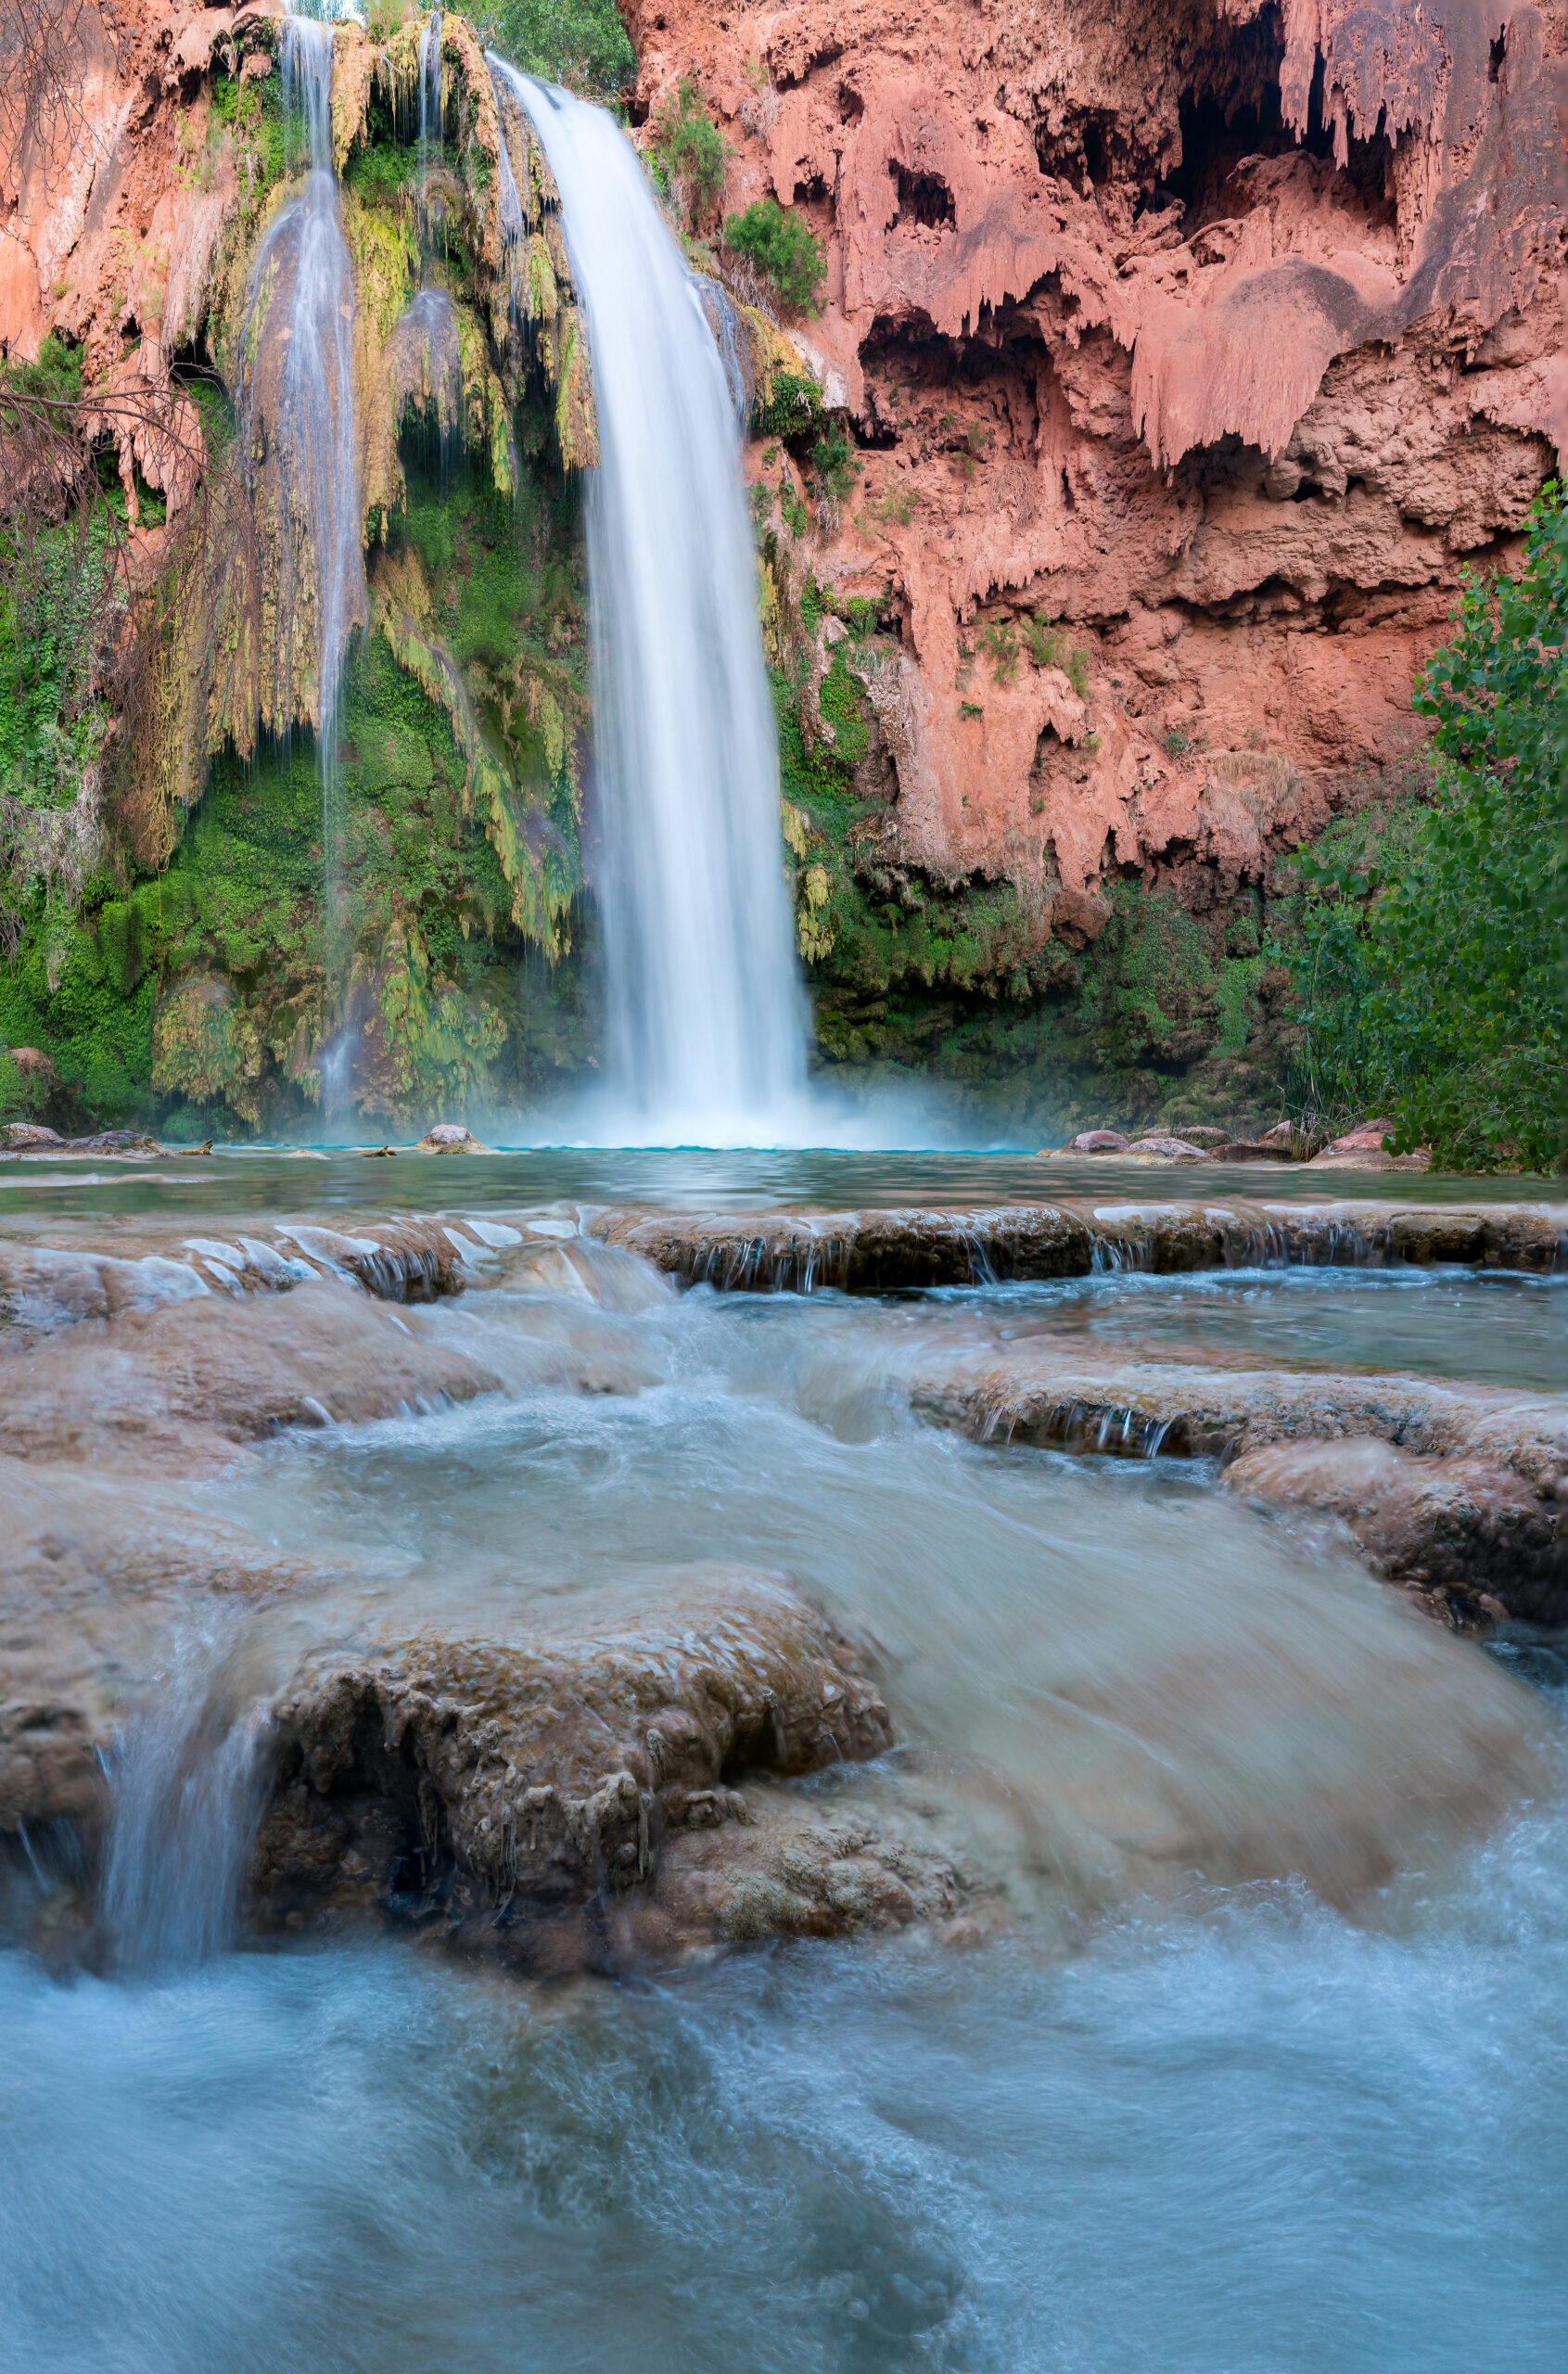 View of Havasu Falls from the plunge pool